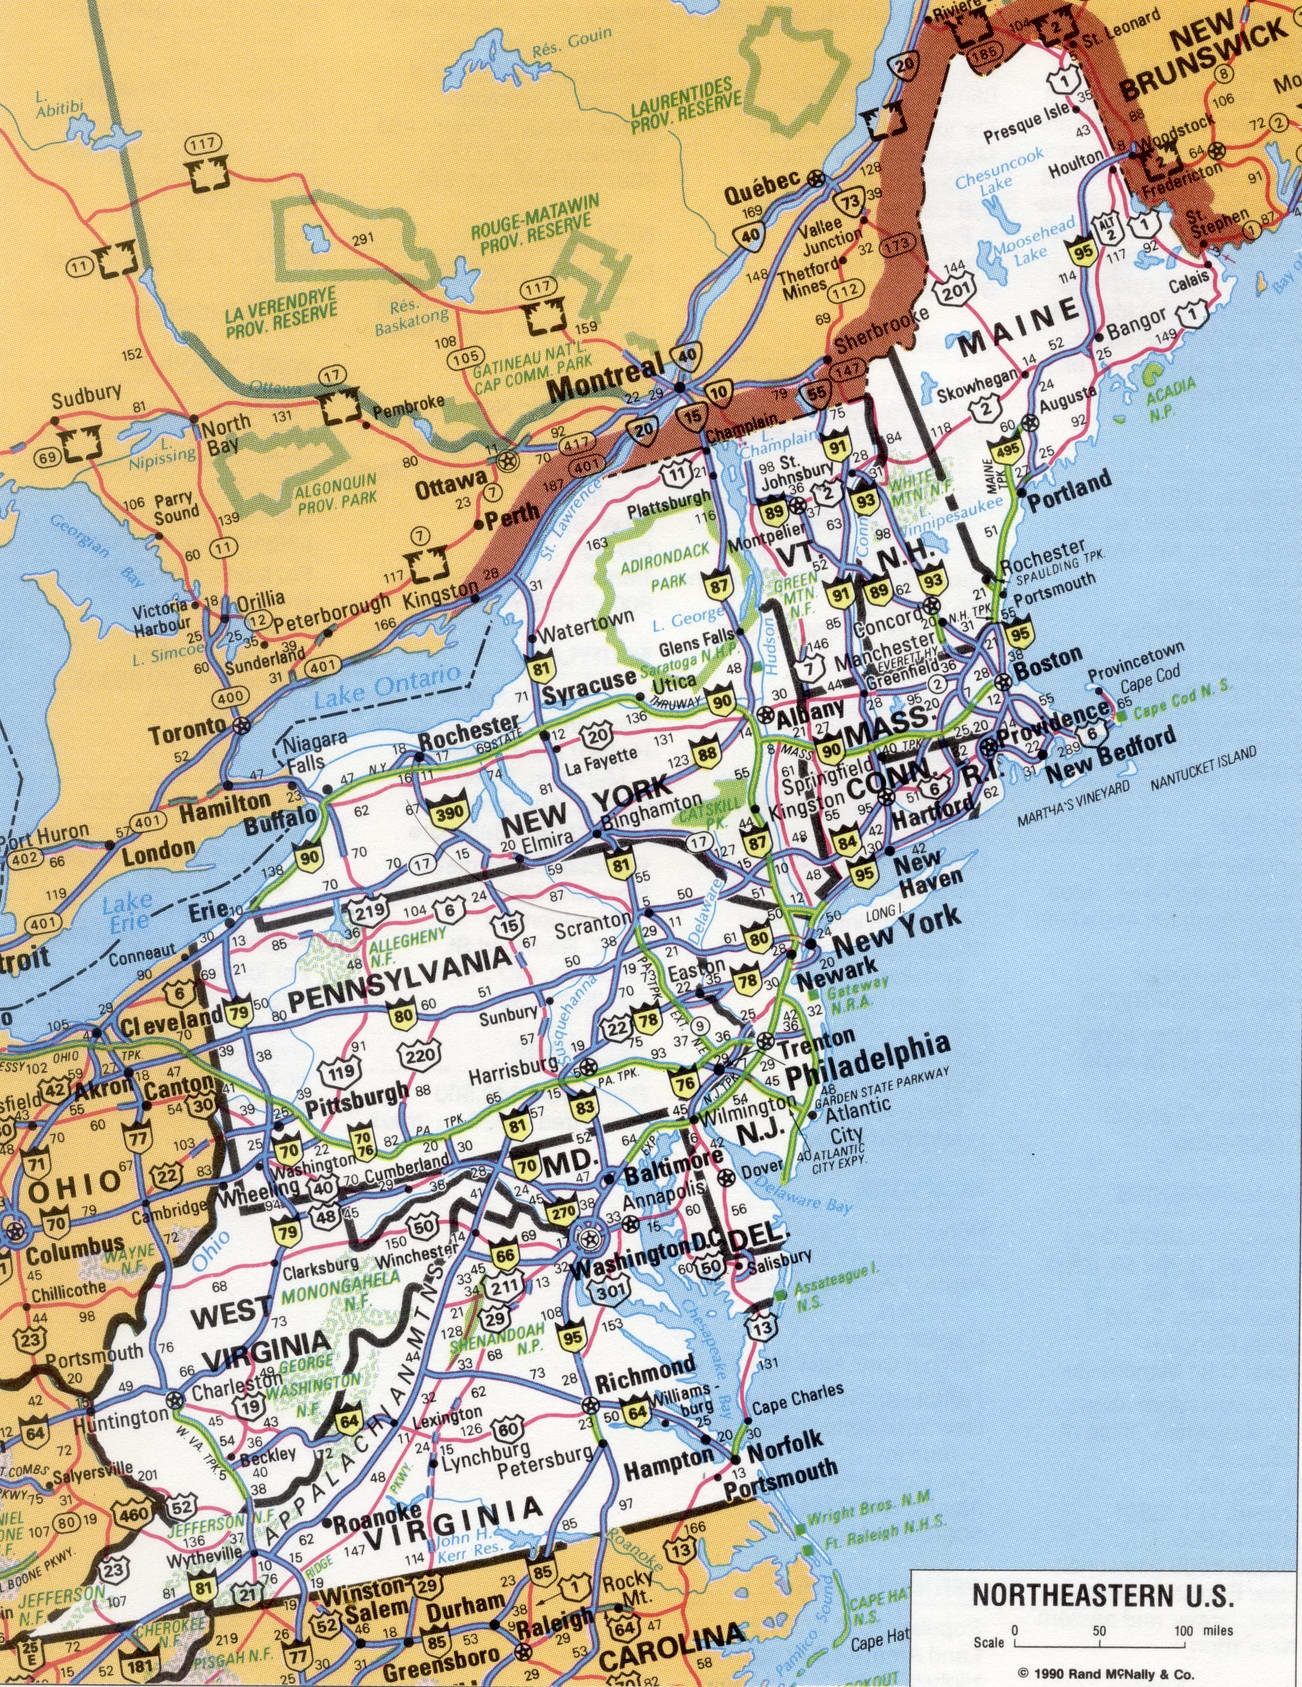 North East Road Map Roads map of US. Maps of the United States   highways, cities 